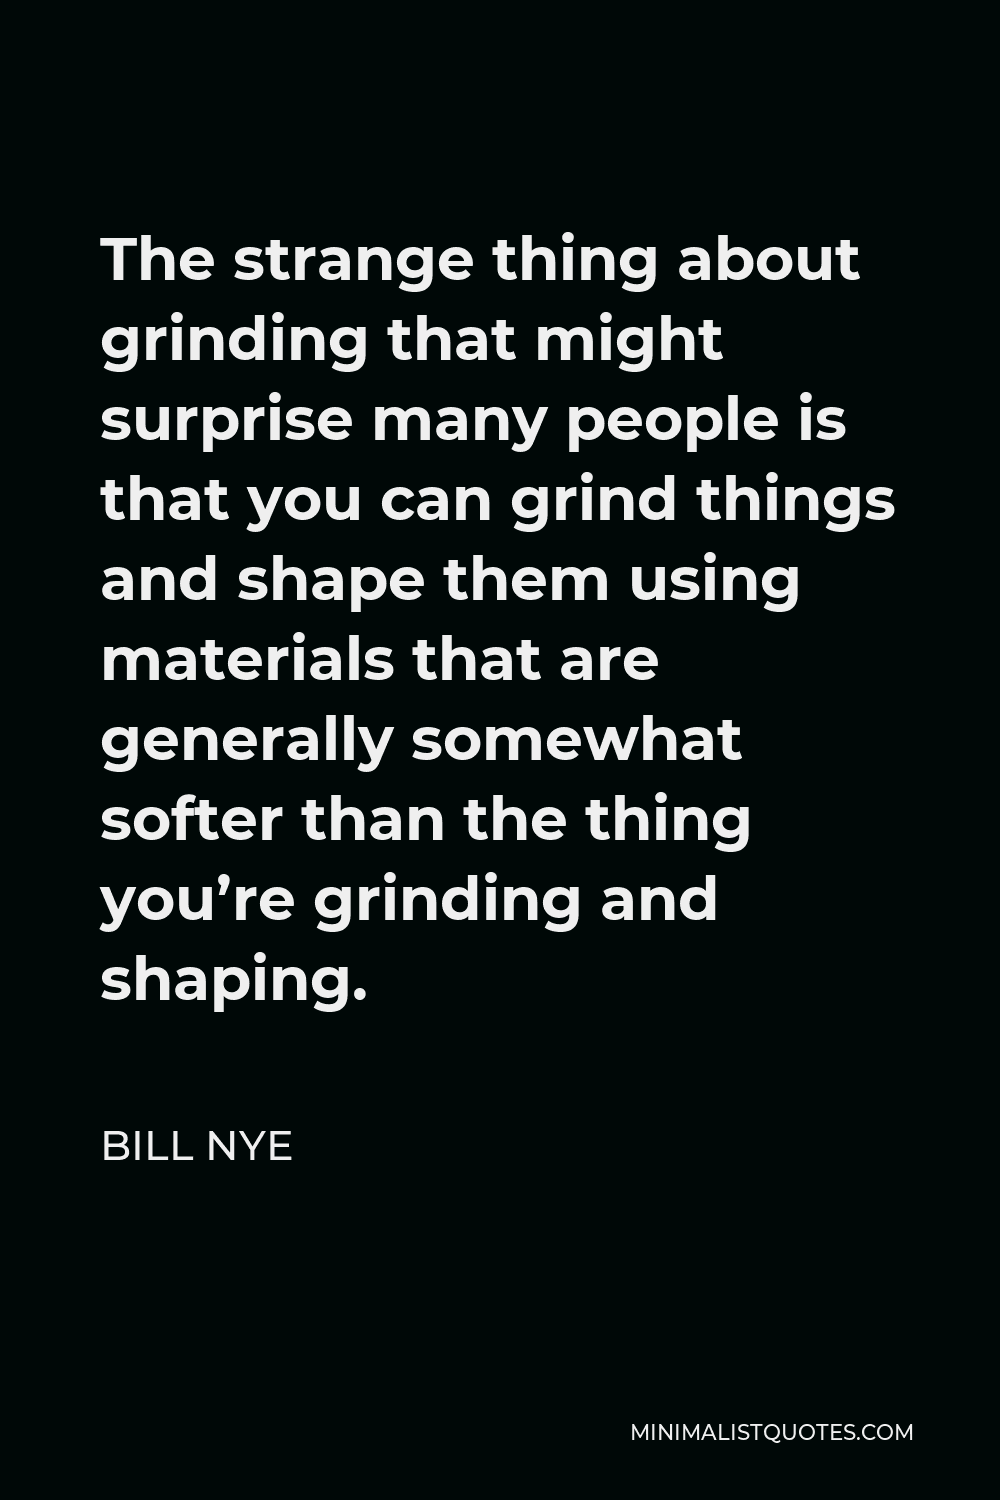 Bill Nye Quote - The strange thing about grinding that might surprise many people is that you can grind things and shape them using materials that are generally somewhat softer than the thing you’re grinding and shaping.